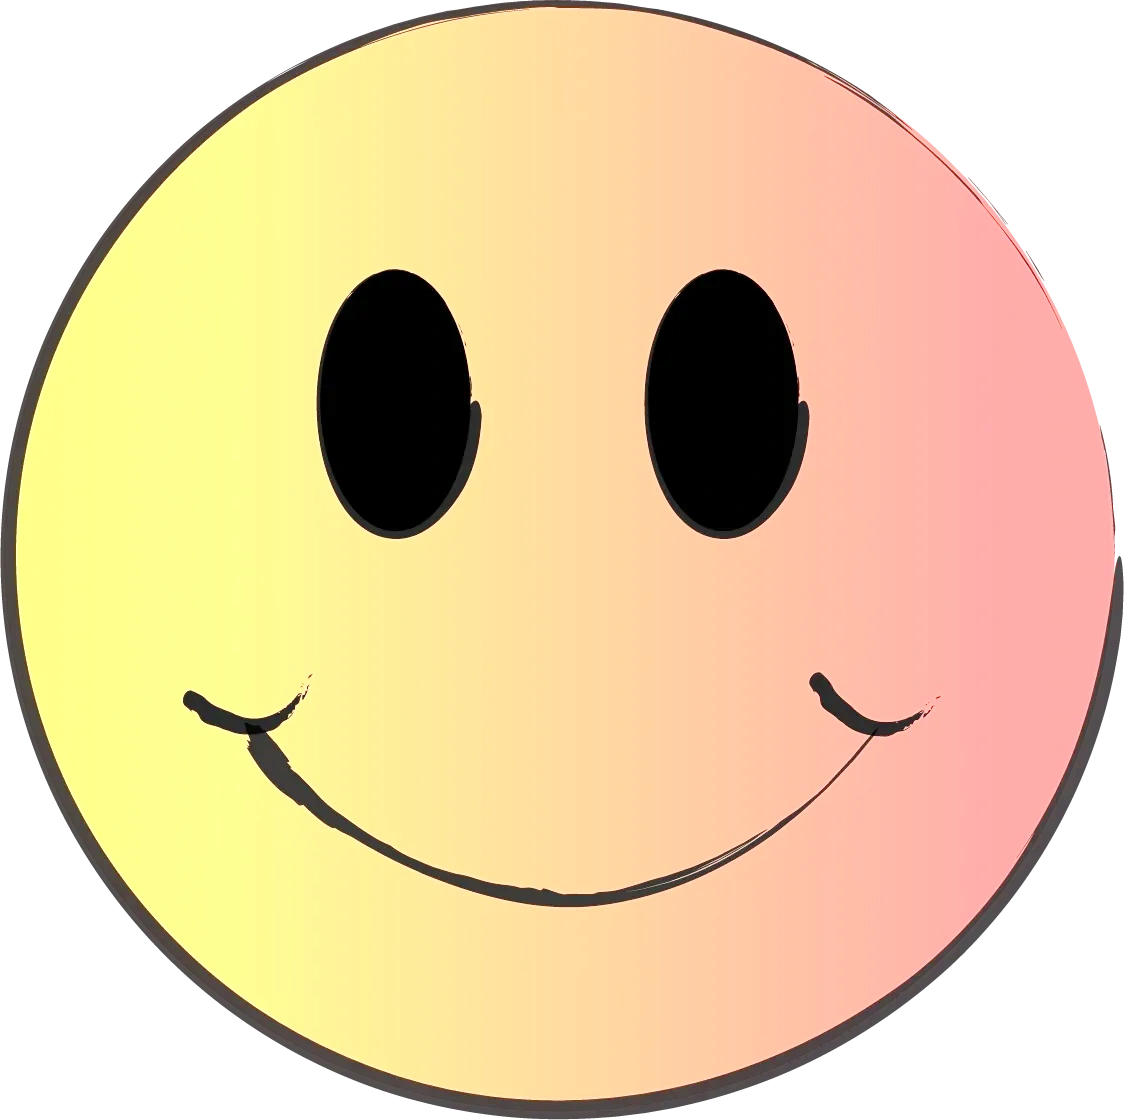 Colorful smiley face graphic to welcome you to Southfield Therapy.